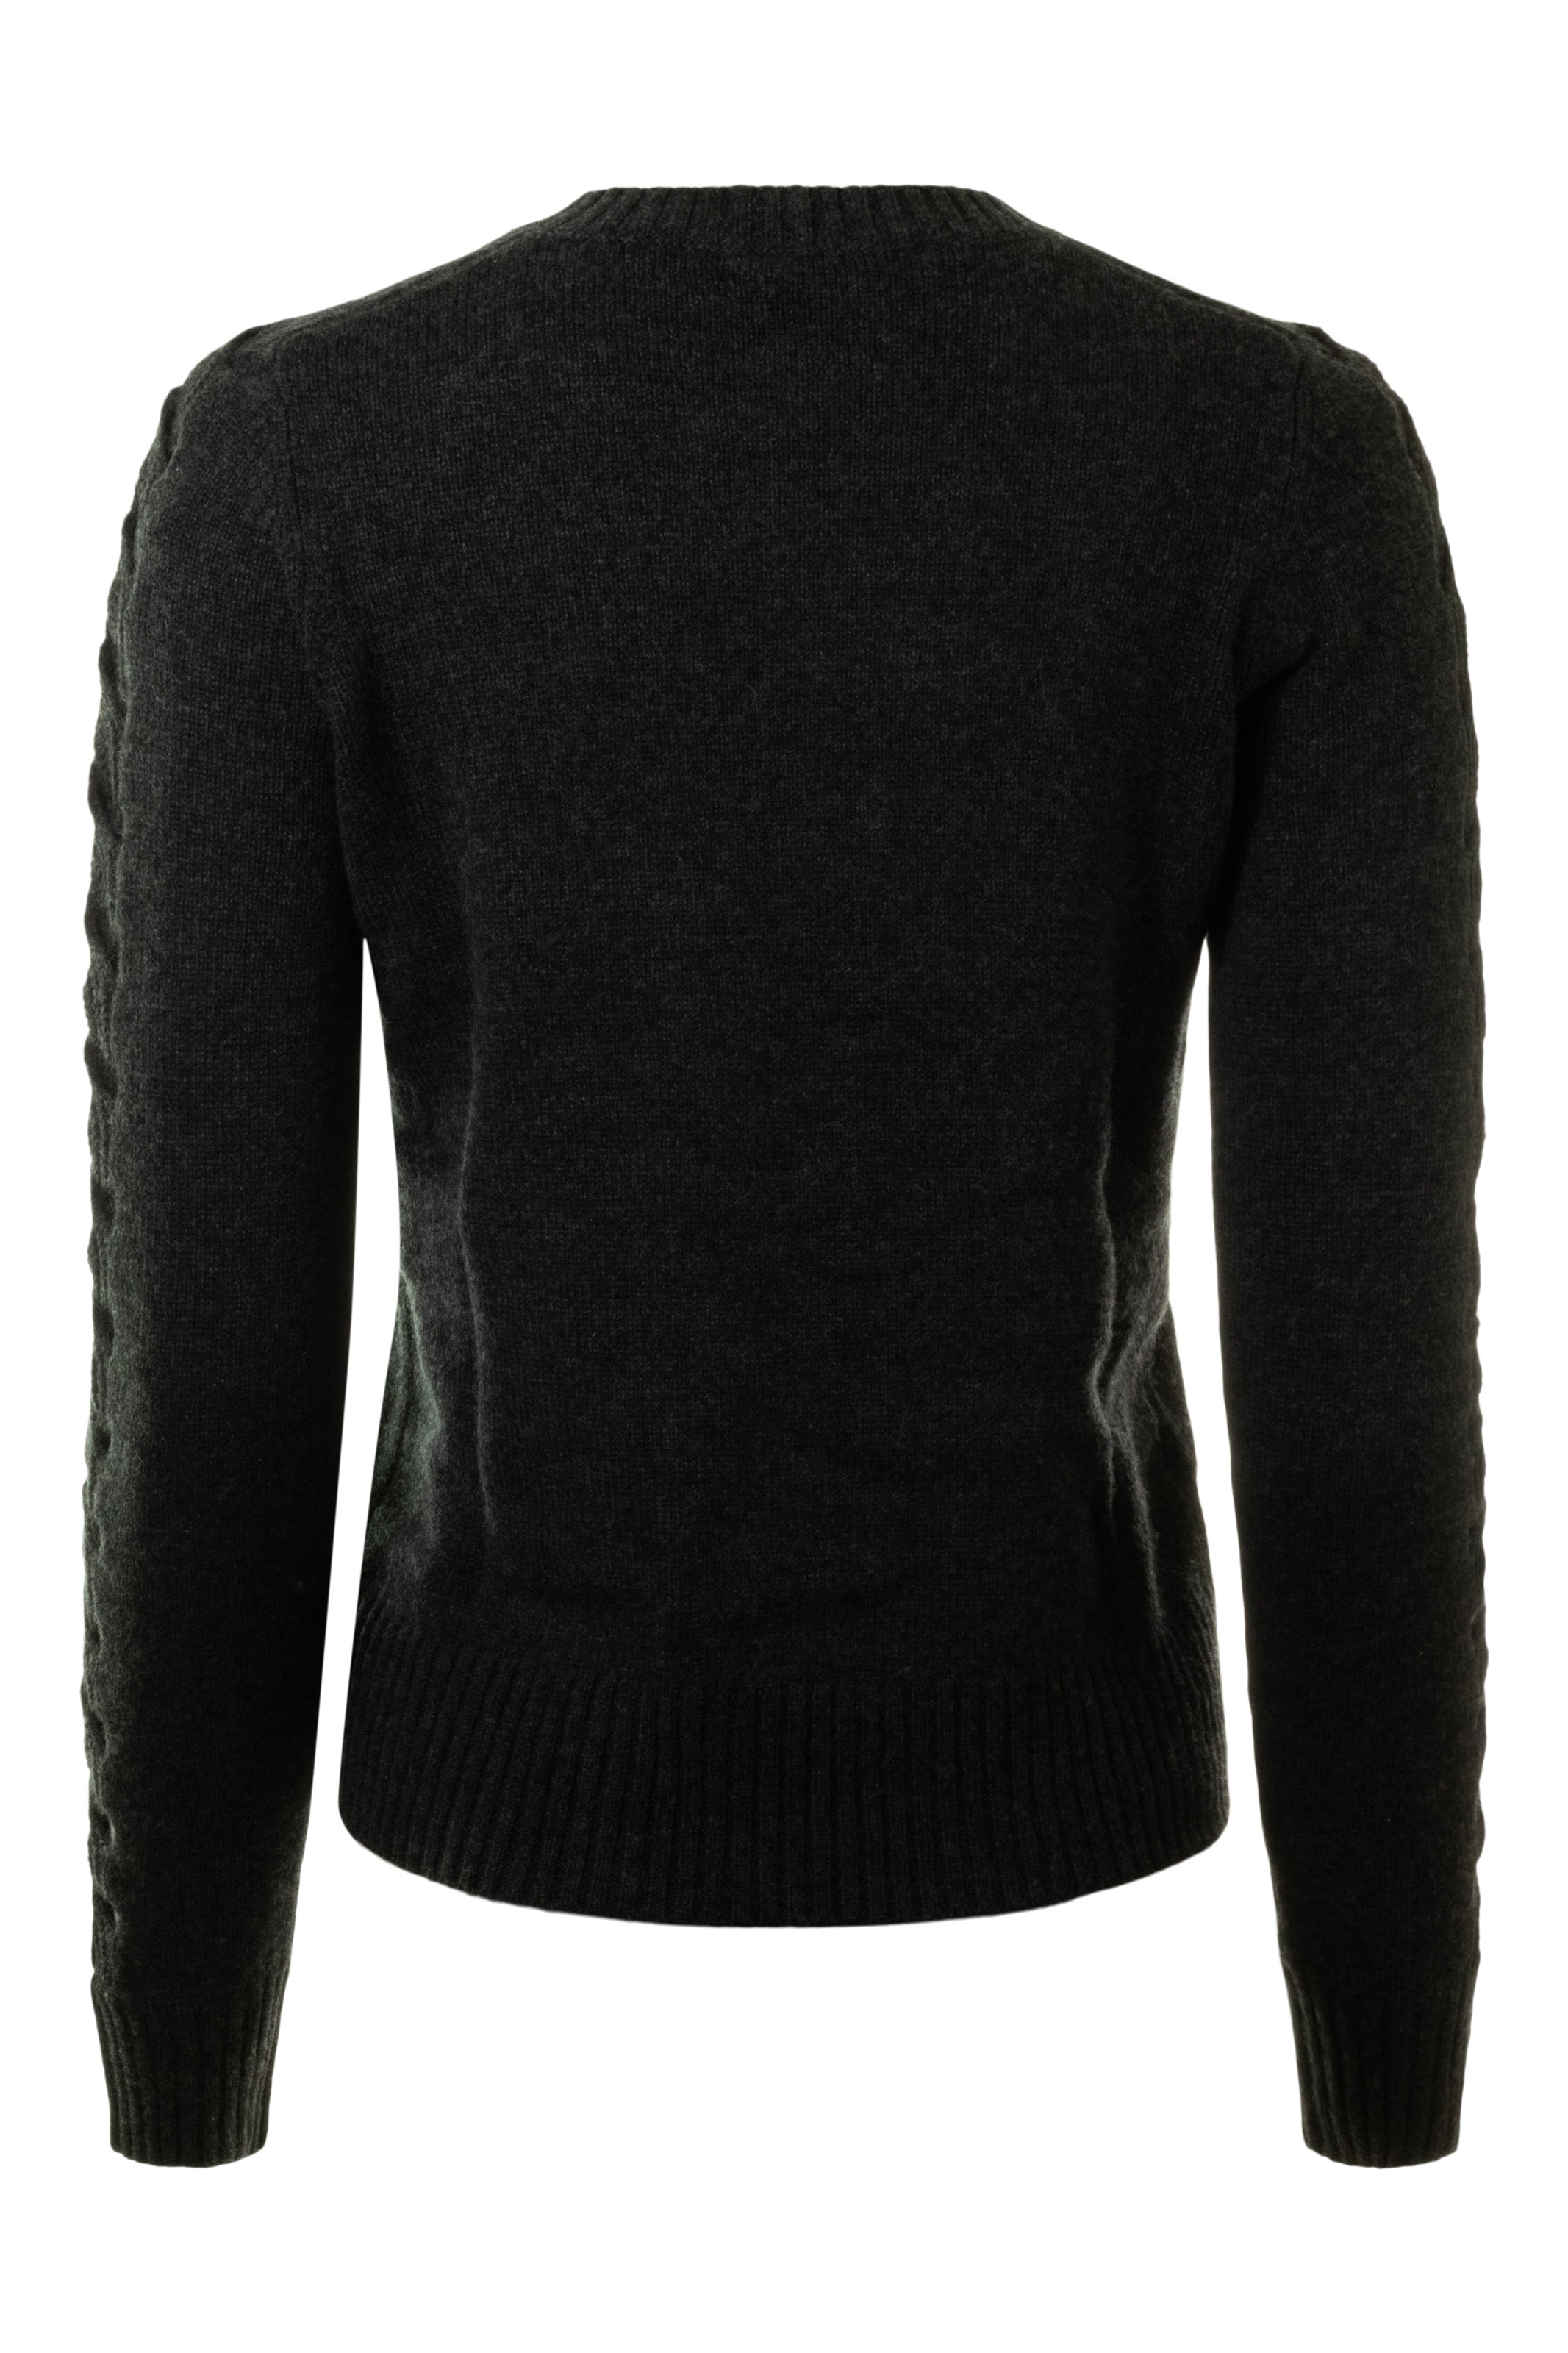 Autumn Cashmere Crewneck Sweater with Open Cable Sleeves in Pepper